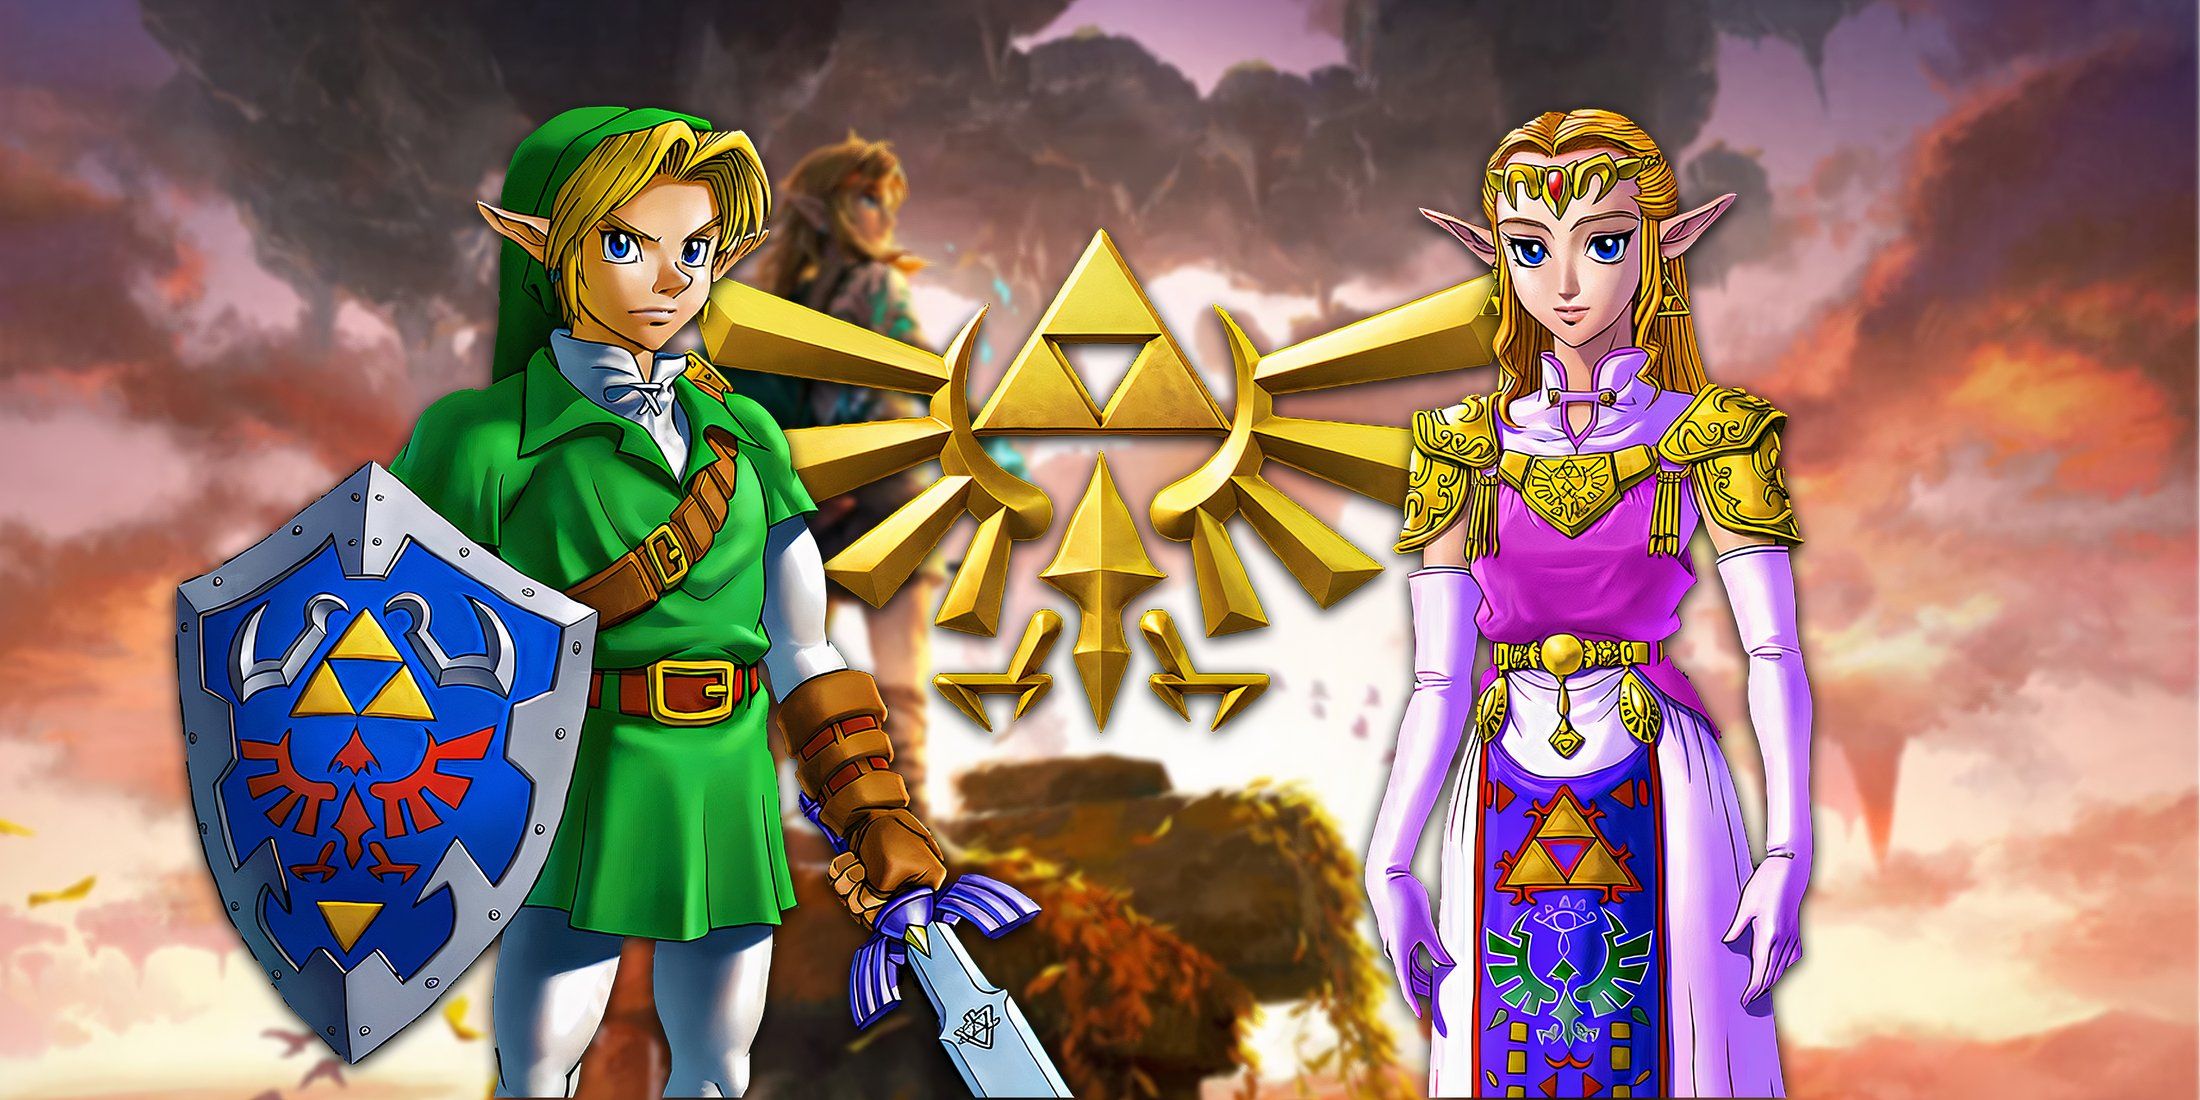 Classic Link and Zelda with Triforce logo over Tears of the Kingdom background